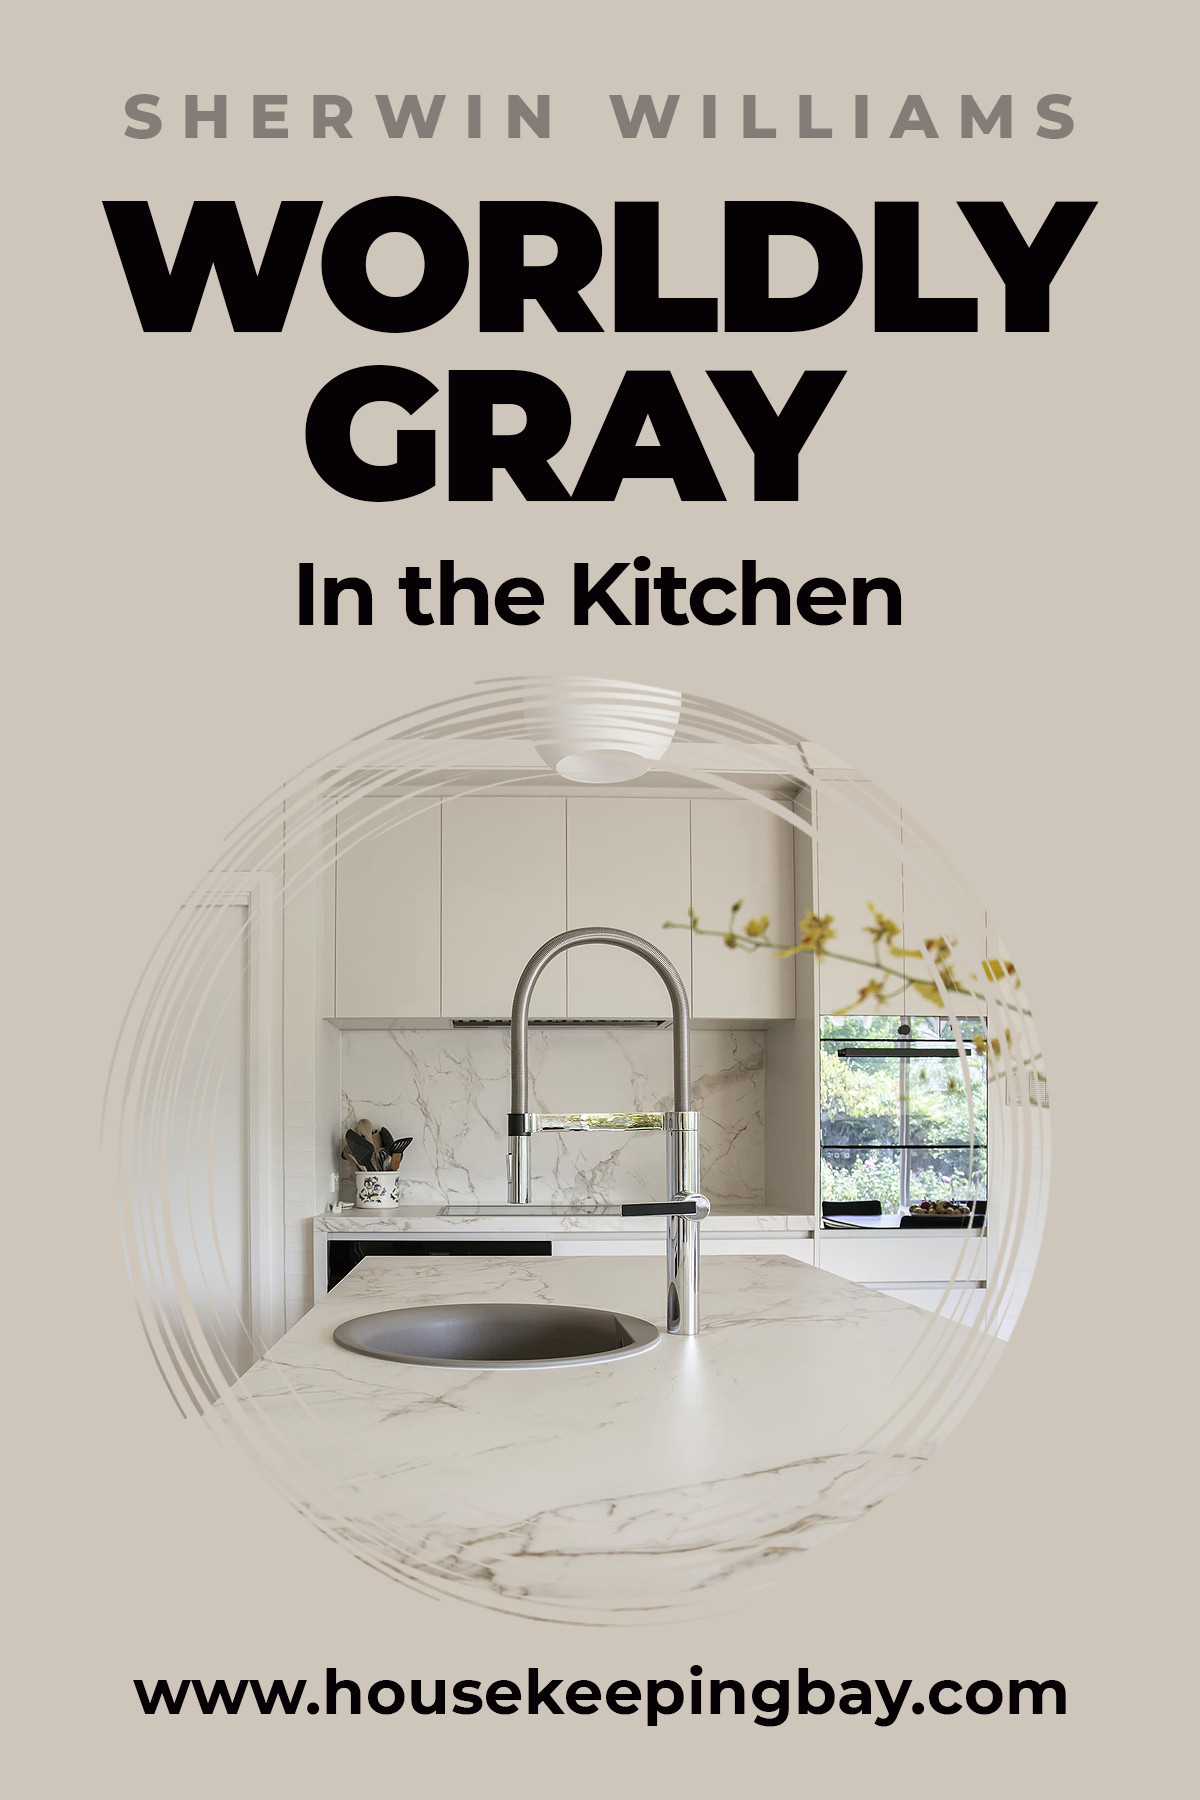 Worldly Gray in the kitchen